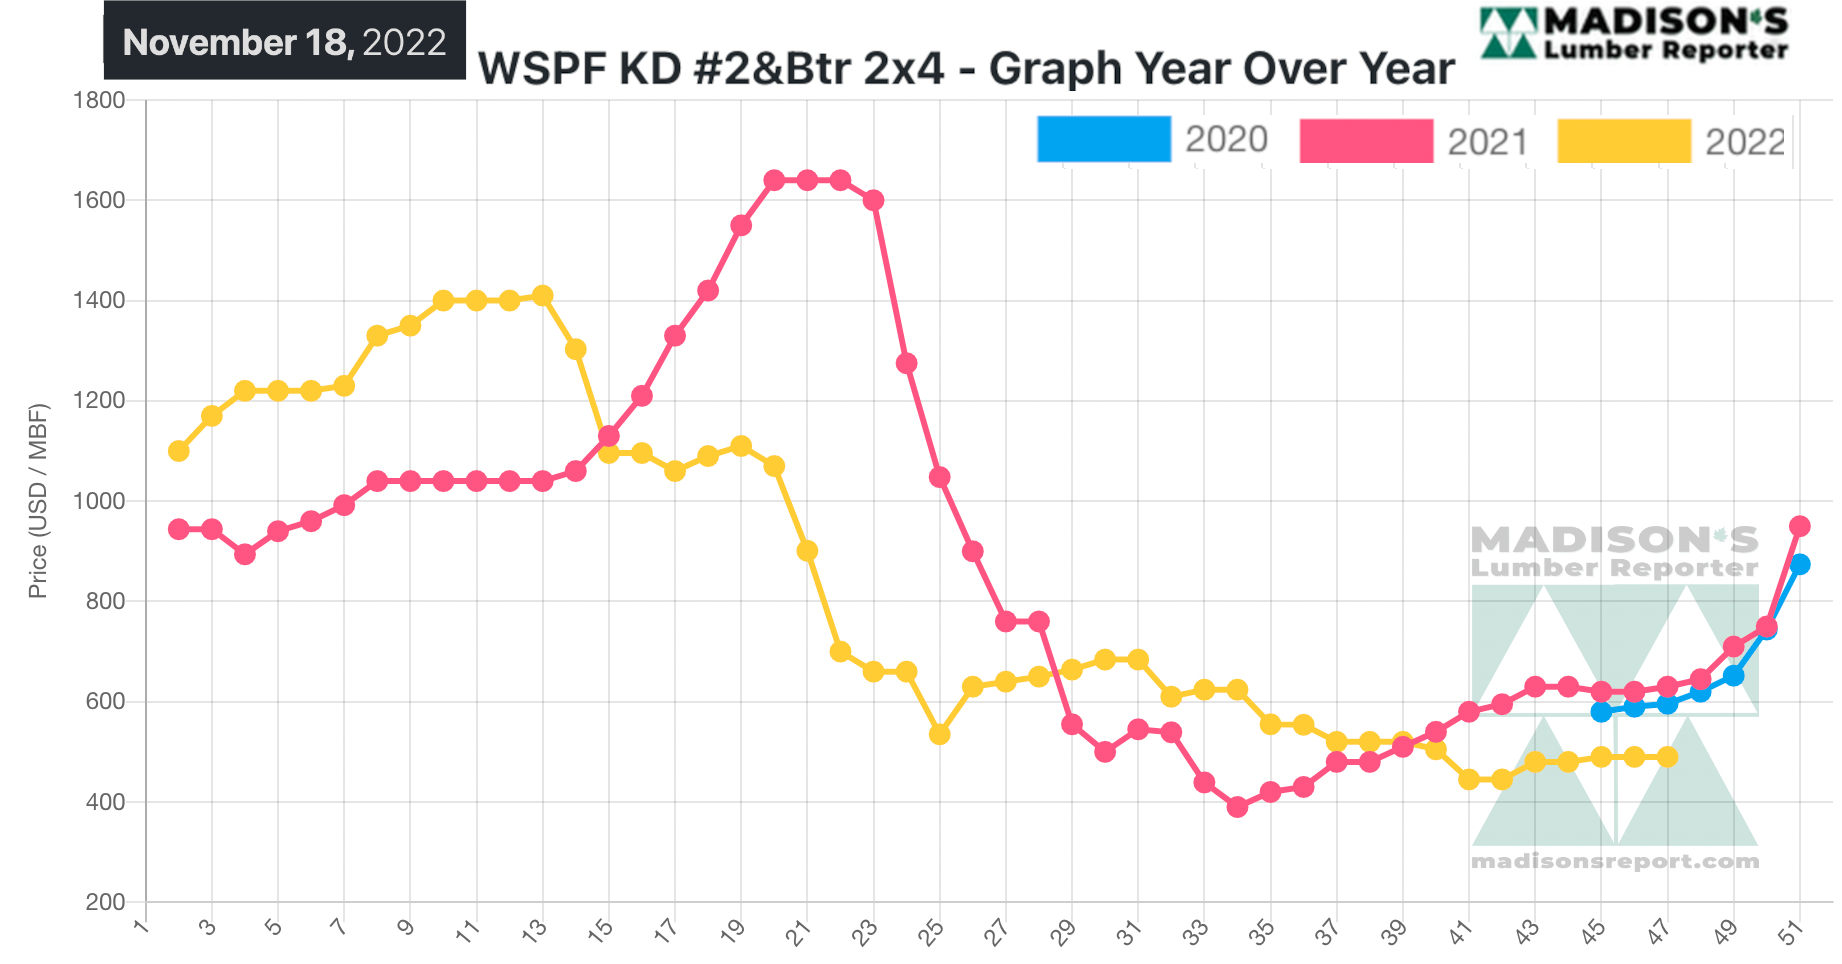 Madison's Lumber Reporter - November 18, 2022 - WSPF KD #2&Btr 2x4 - Graph Year Over Year